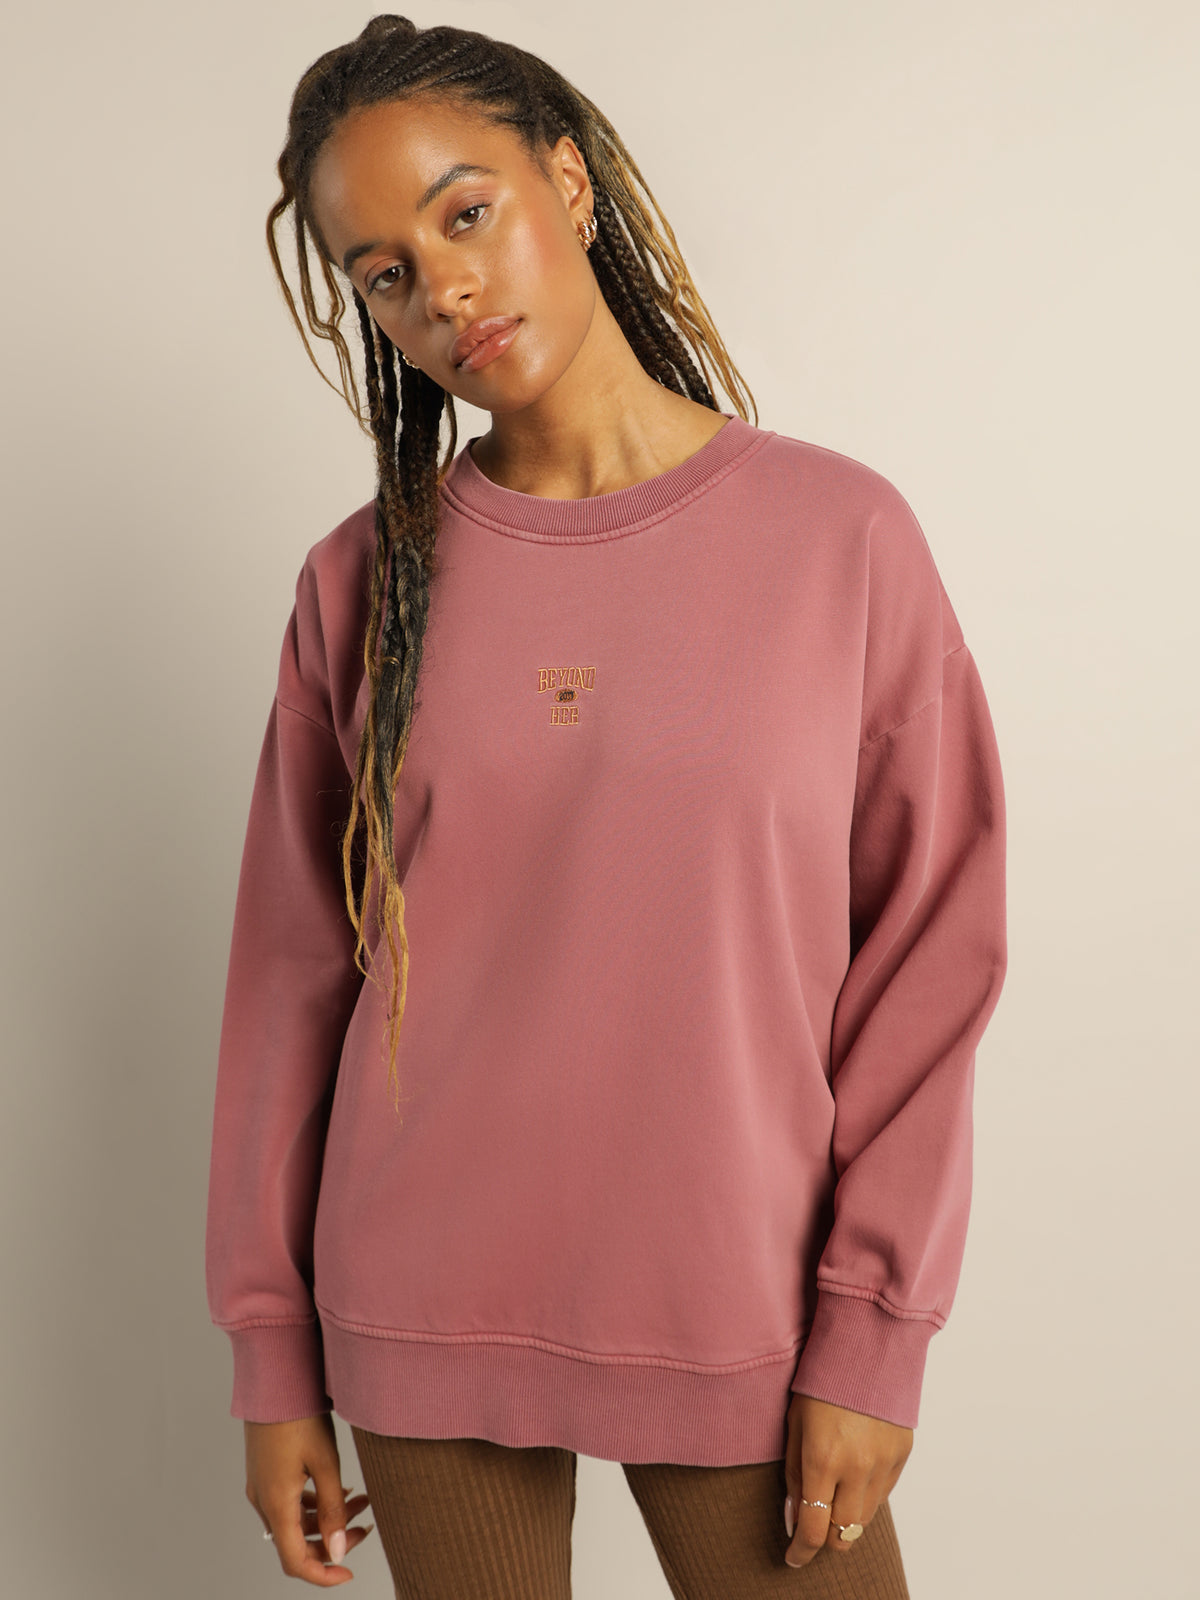 Beyond Originals Sweat in Washed Berry